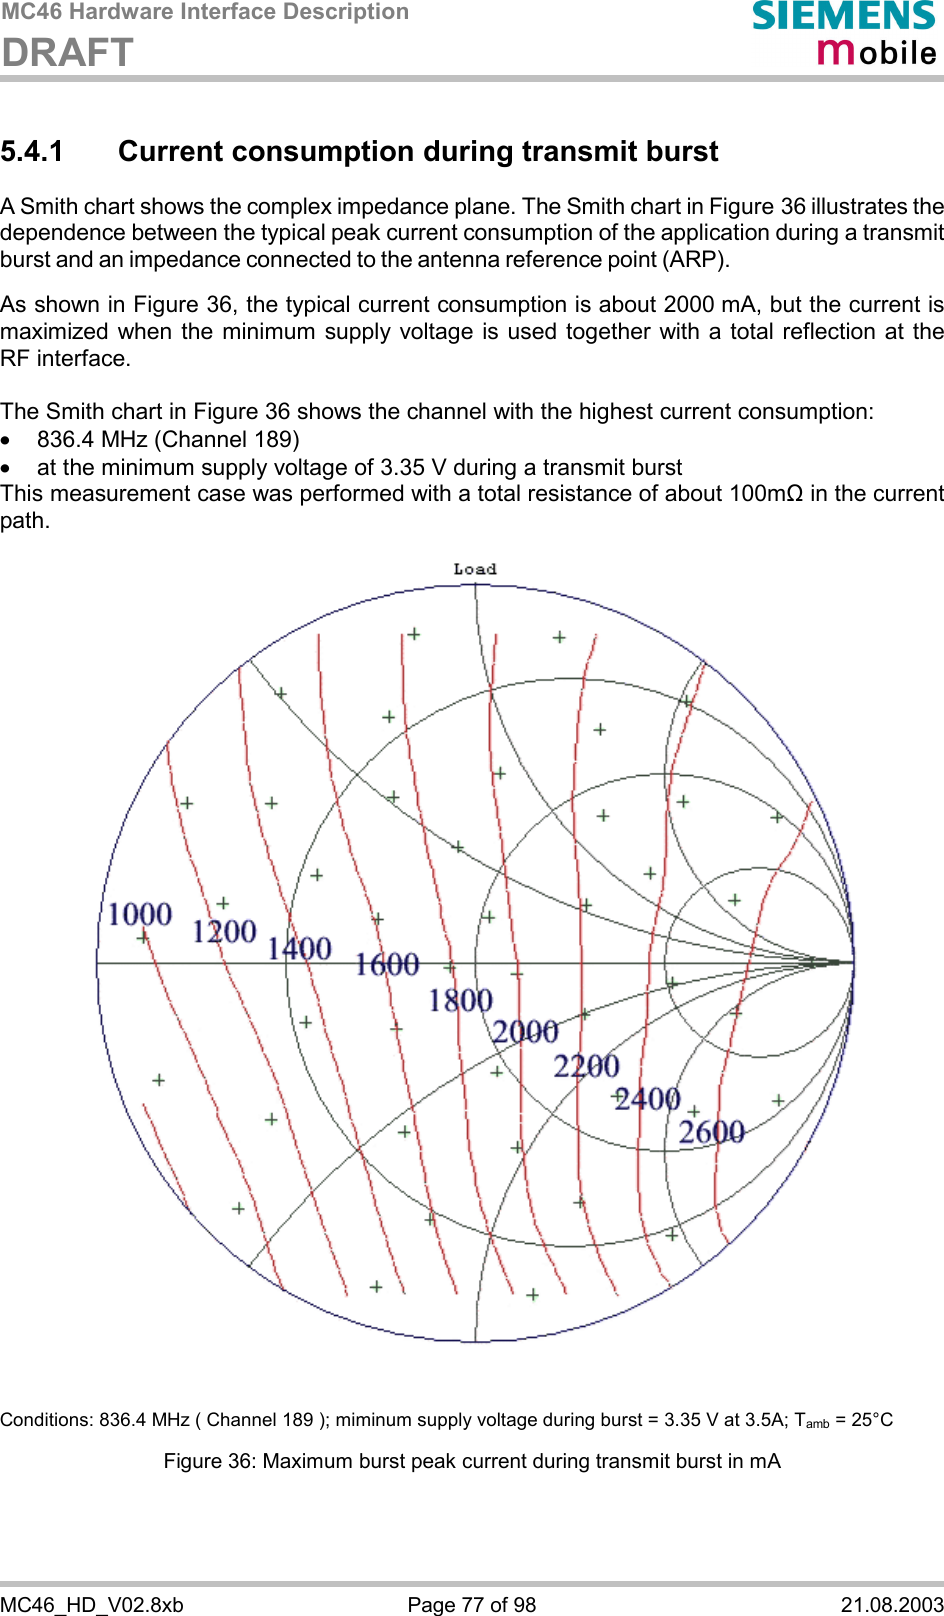 MC46 Hardware Interface Description DRAFT      MC46_HD_V02.8xb  Page 77 of 98  21.08.2003 5.4.1  Current consumption during transmit burst A Smith chart shows the complex impedance plane. The Smith chart in Figure 36 illustrates the dependence between the typical peak current consumption of the application during a transmit burst and an impedance connected to the antenna reference point (ARP).   As shown in Figure 36, the typical current consumption is about 2000 mA, but the current is maximized when the minimum supply voltage is used together with a total reflection at the RF interface.  The Smith chart in Figure 36 shows the channel with the highest current consumption: ·  836.4 MHz (Channel 189)  ·  at the minimum supply voltage of 3.35 V during a transmit burst This measurement case was performed with a total resistance of about 100m&quot; in the current path.     Conditions: 836.4 MHz ( Channel 189 ); miminum supply voltage during burst = 3.35 V at 3.5A; Tamb = 25°C Figure 36: Maximum burst peak current during transmit burst in mA 